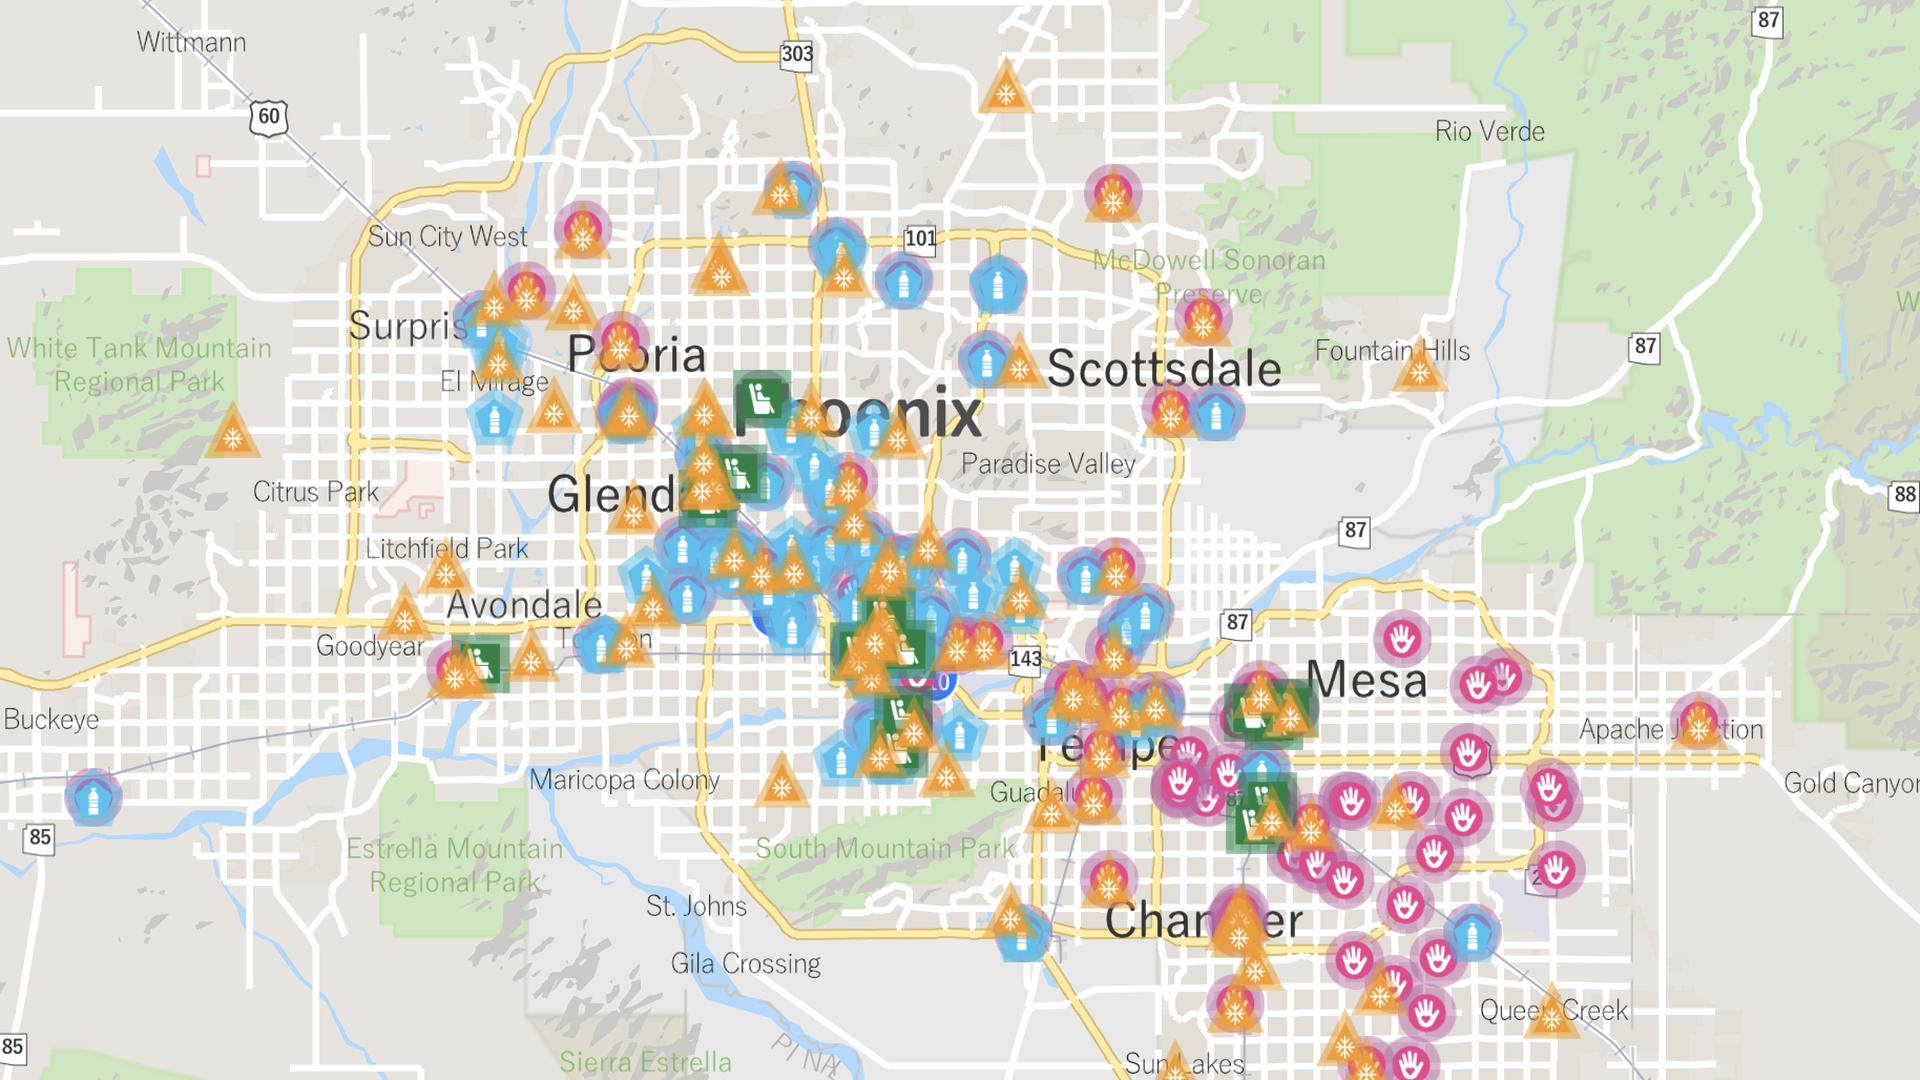 A map of the Phoenix metro area with icons displaying flames, hands, water bottles and recliners.